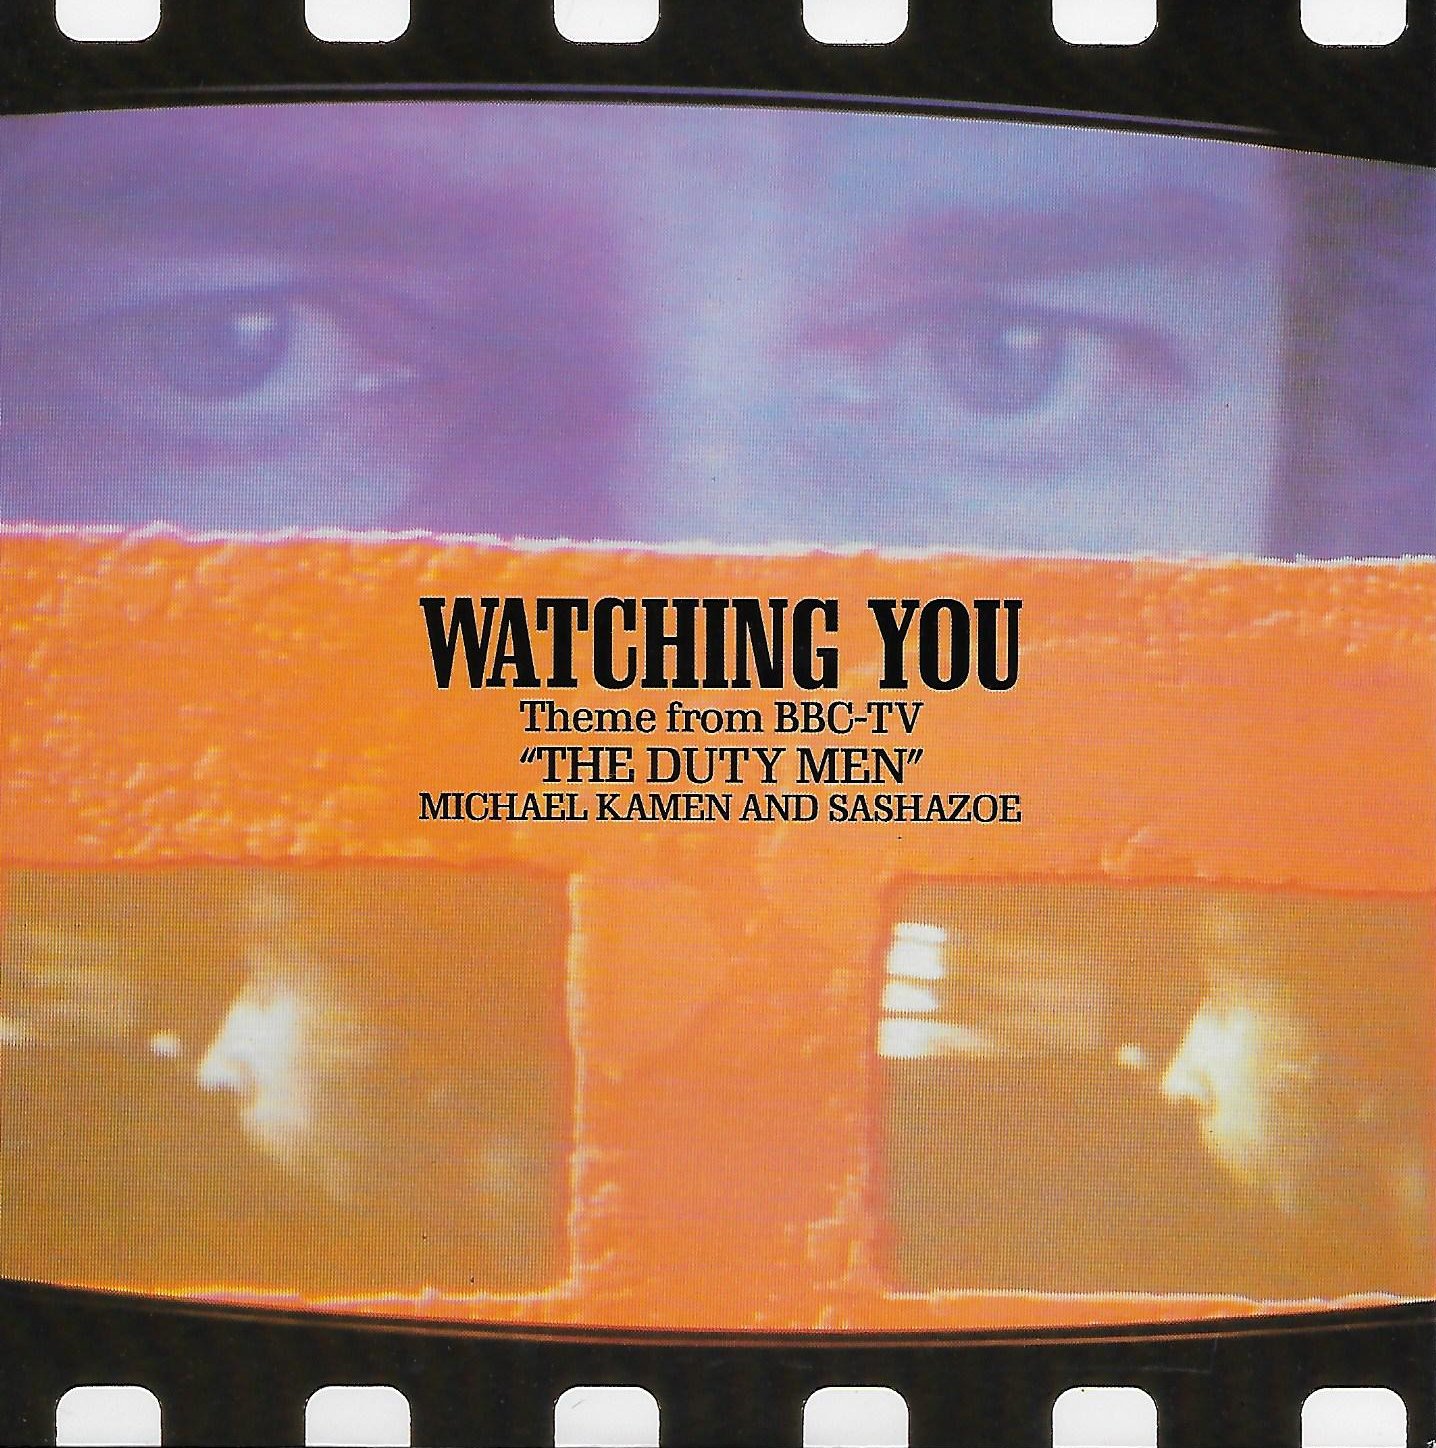 Picture of RESL 215 Watching you (The duty men) by artist Michael Kamen and Sashazoe from the BBC records and Tapes library